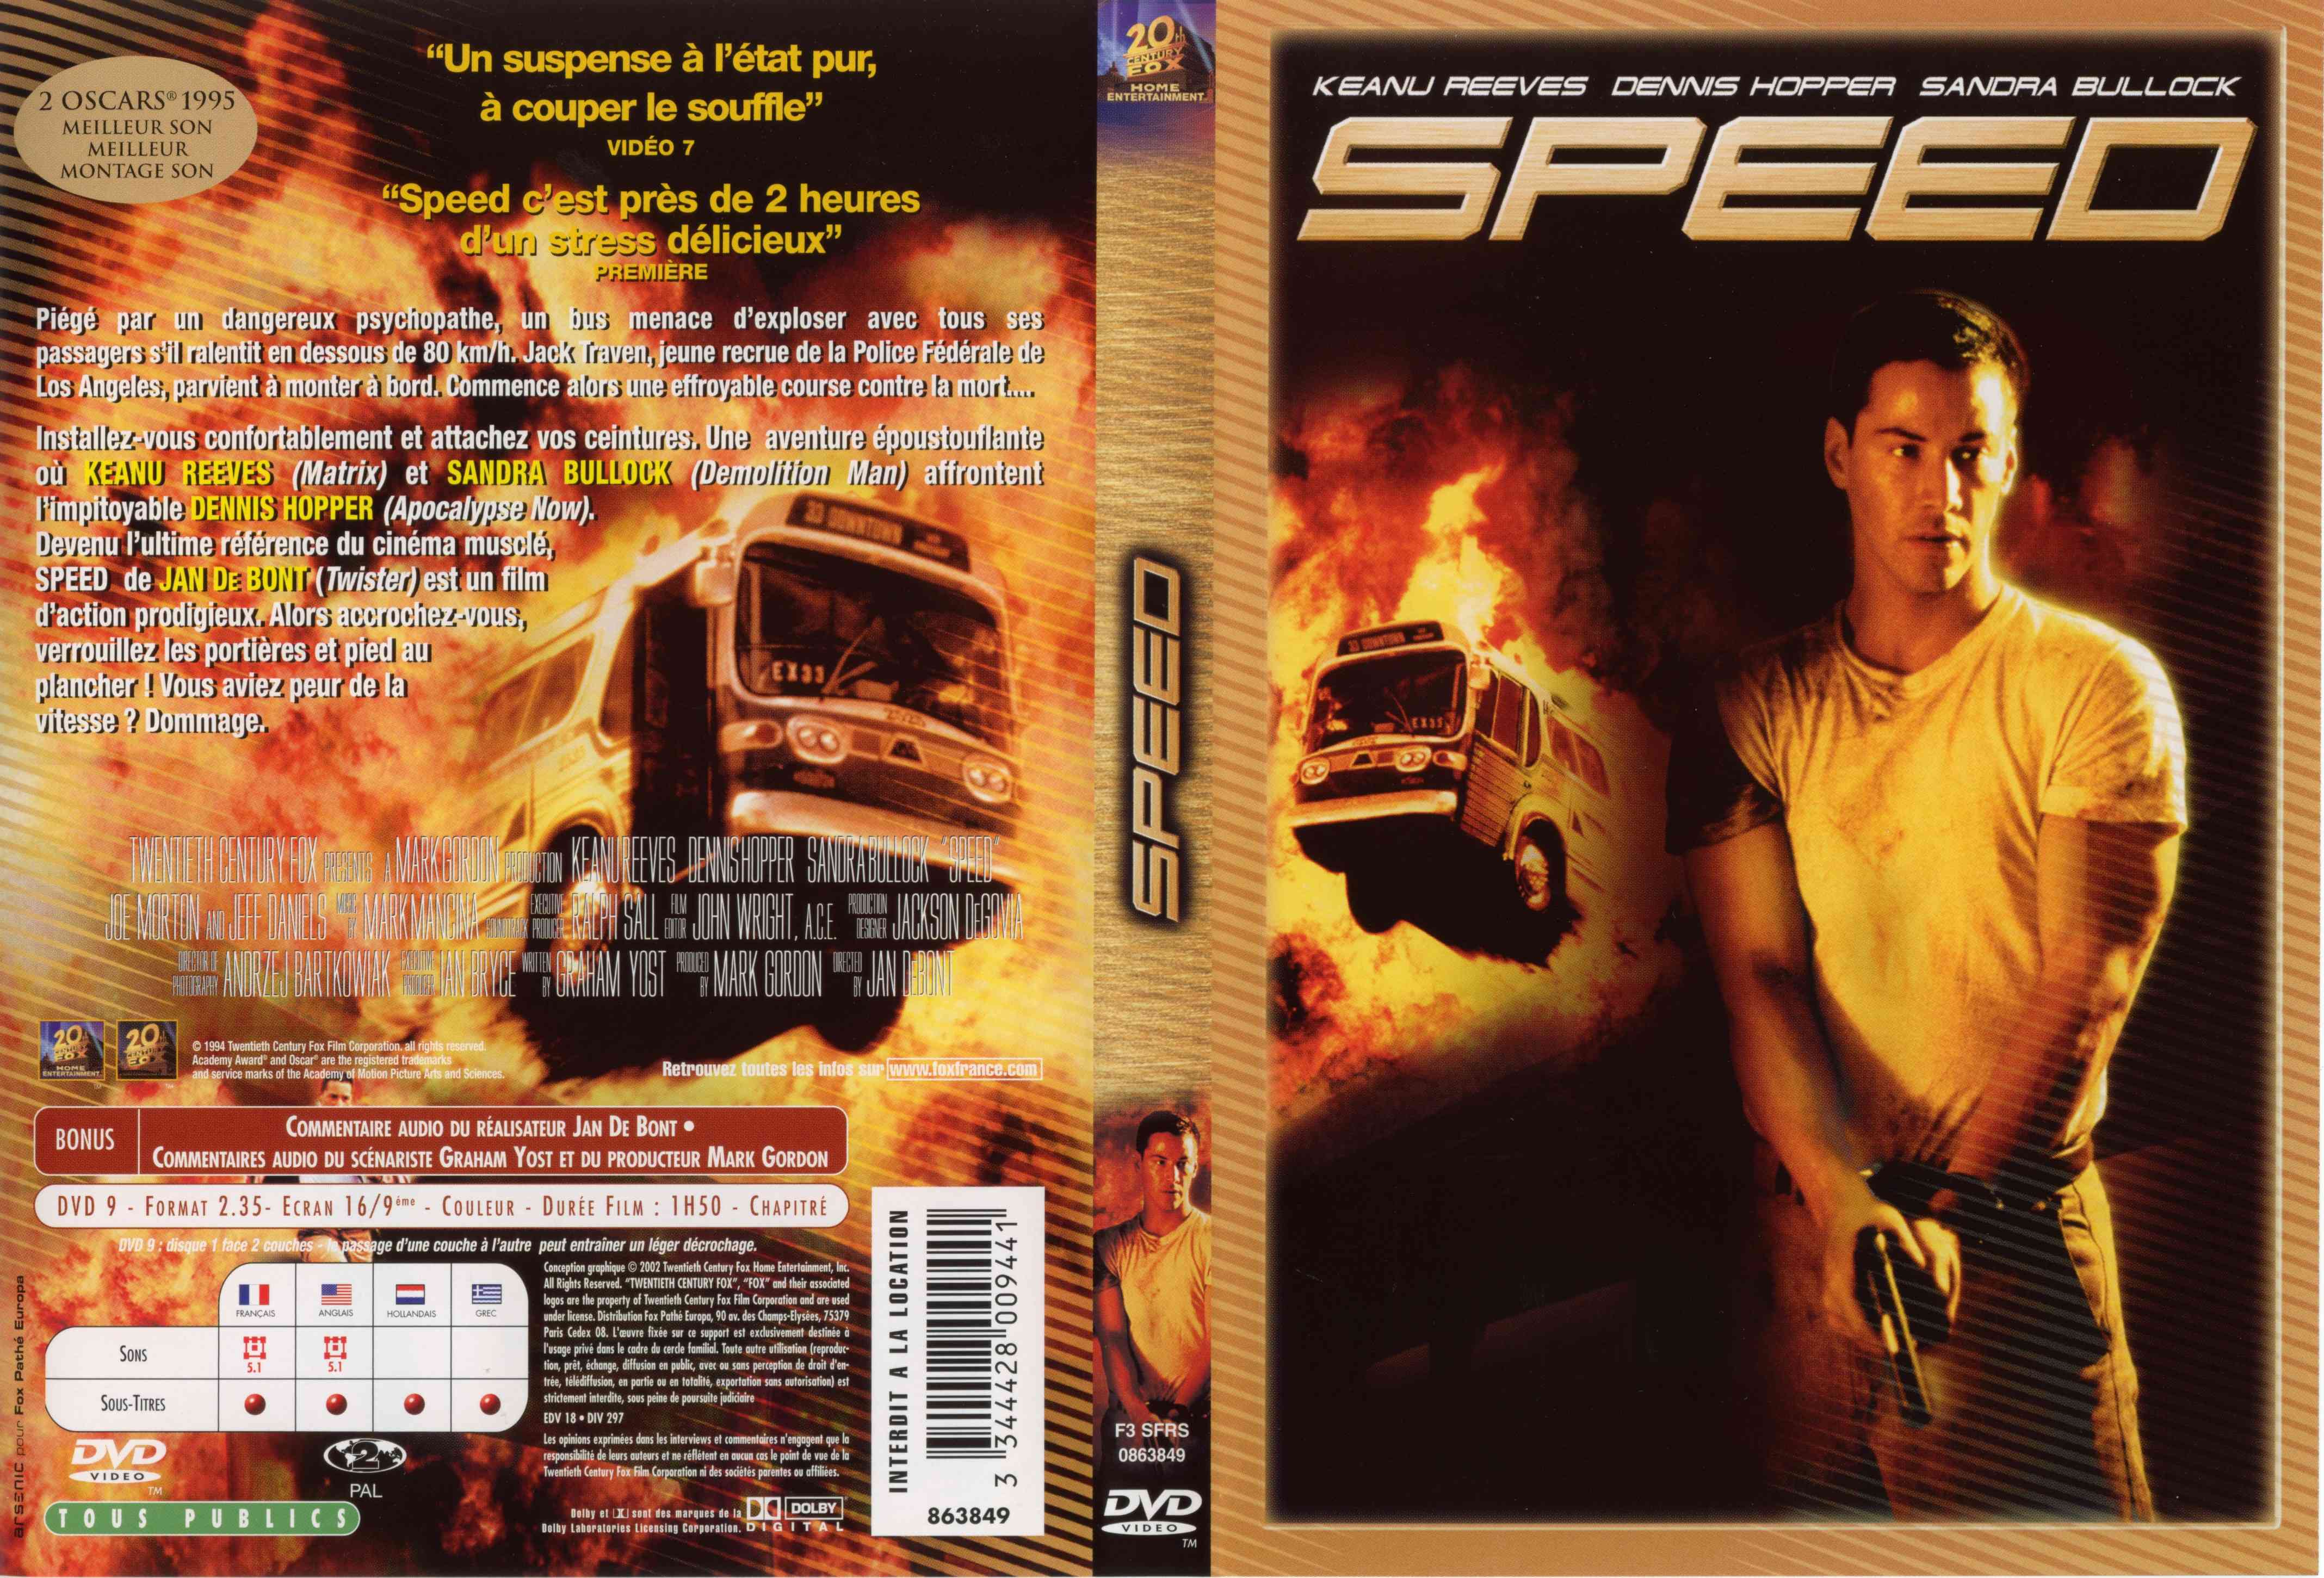 Jaquette DVD Speed